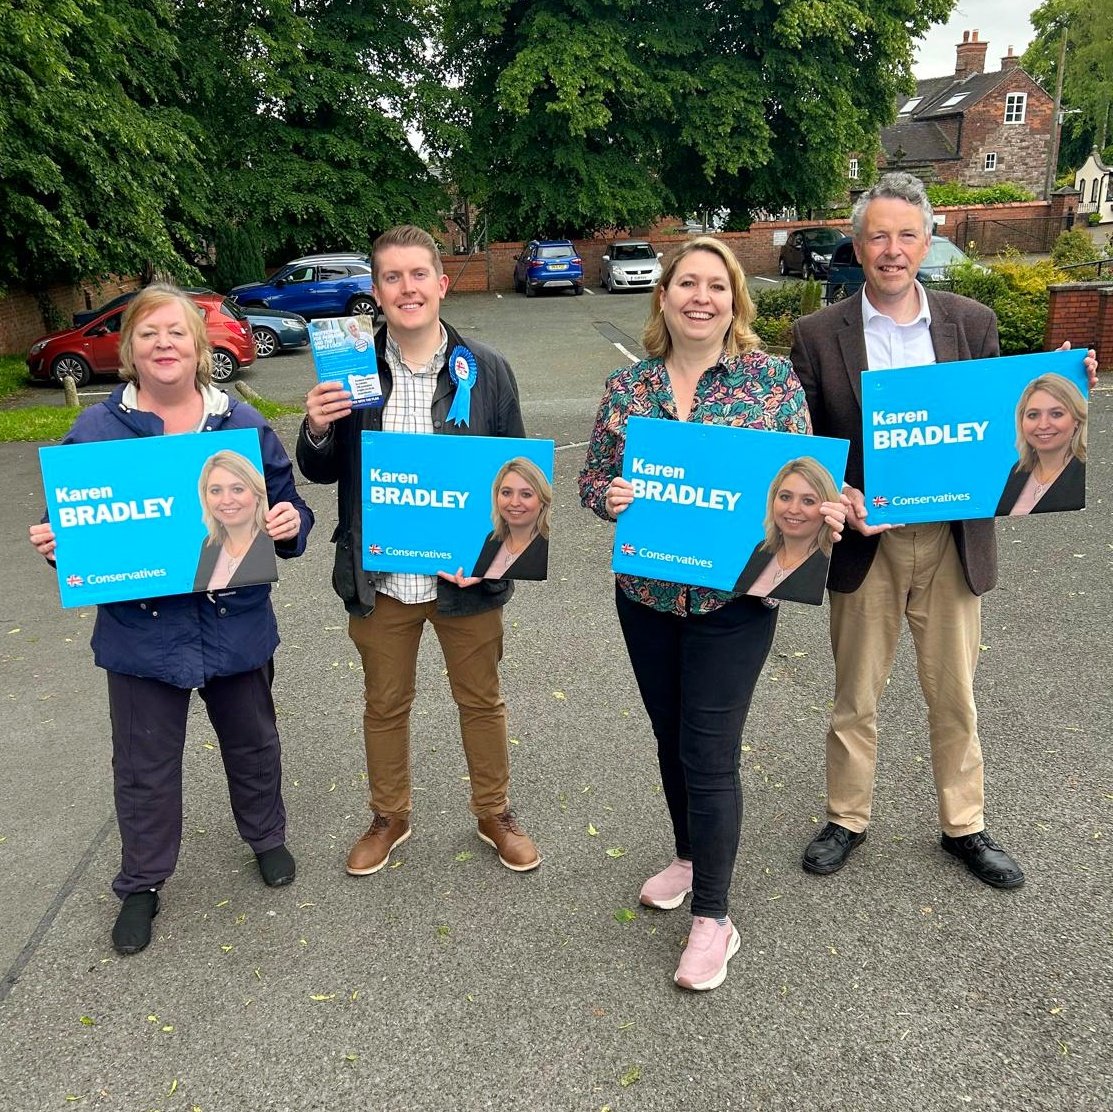 Brilliant to be out campaigning for Karen Bradley in Cheddleton today. Two great sessions with lots of support for our Staffordshire Moorlands @Conservatives team! 💙💪 #ToryCanvass #GE2024 #VoteConservative